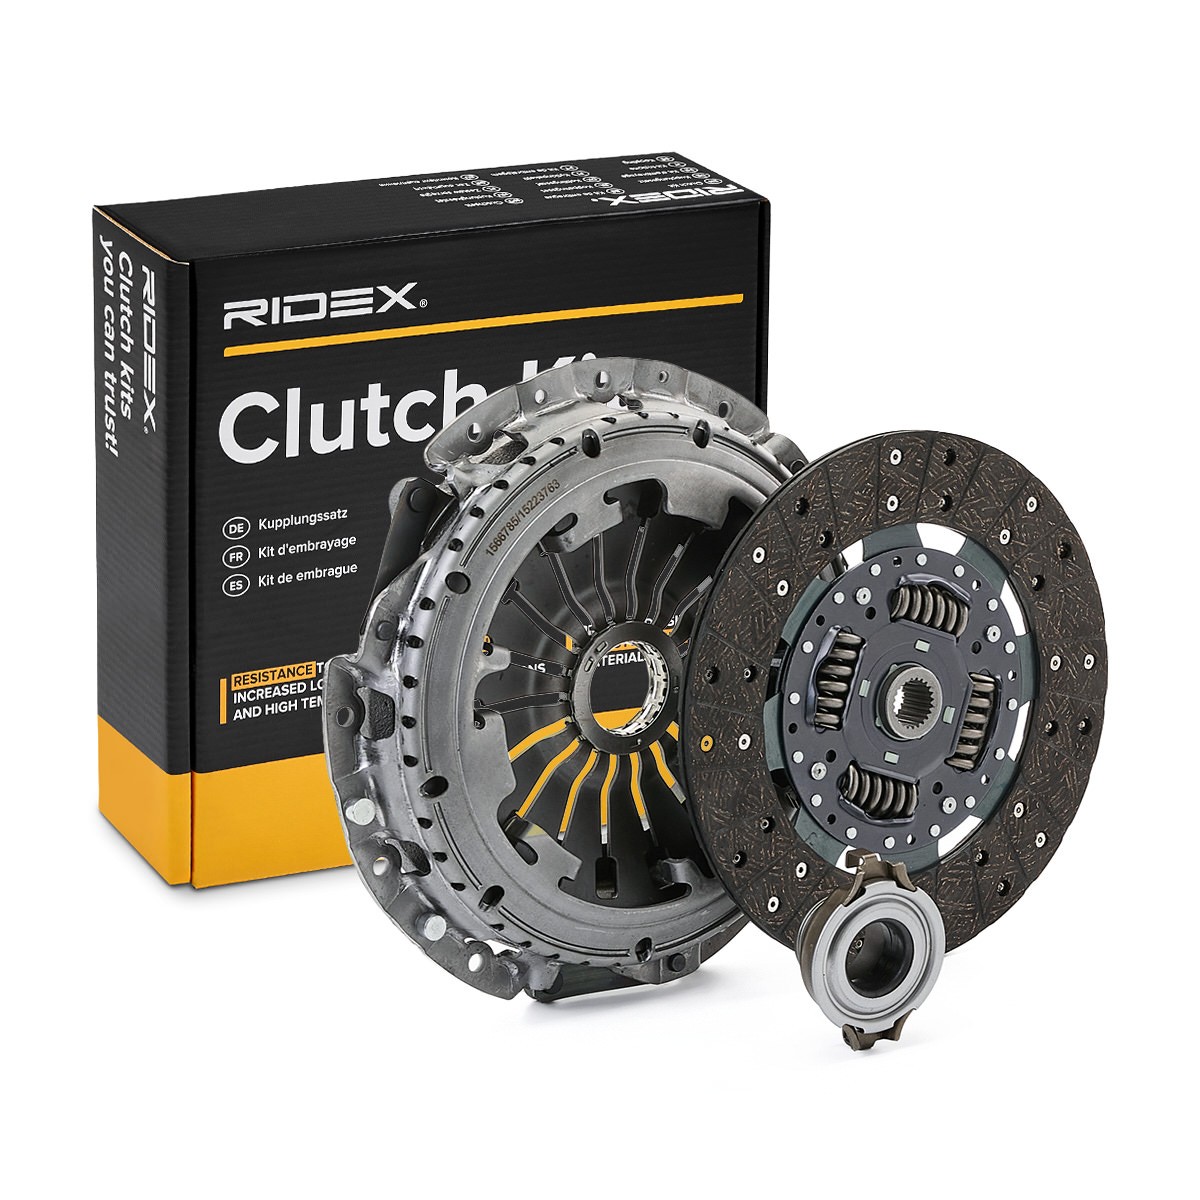 RIDEX 479C0442 Clutch kit for engines with dual-mass flywheel, with clutch pressure plate, with clutch disc, with clutch release bearing, Check and replace dual-mass flywheel if necessary., 280mm